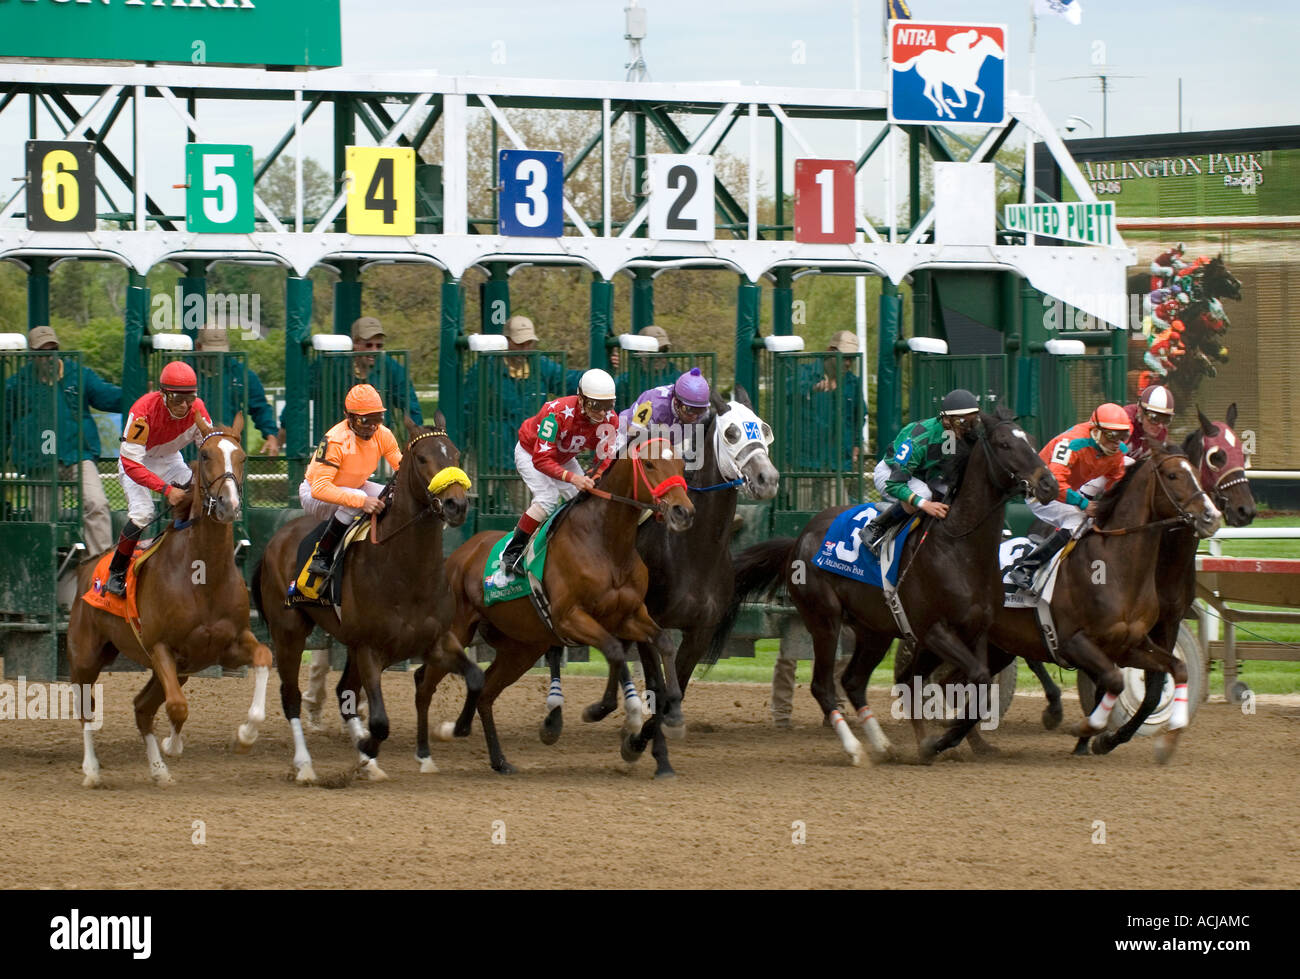 Race Horses Breaking from Starting Gate Stock Photo - Alamy